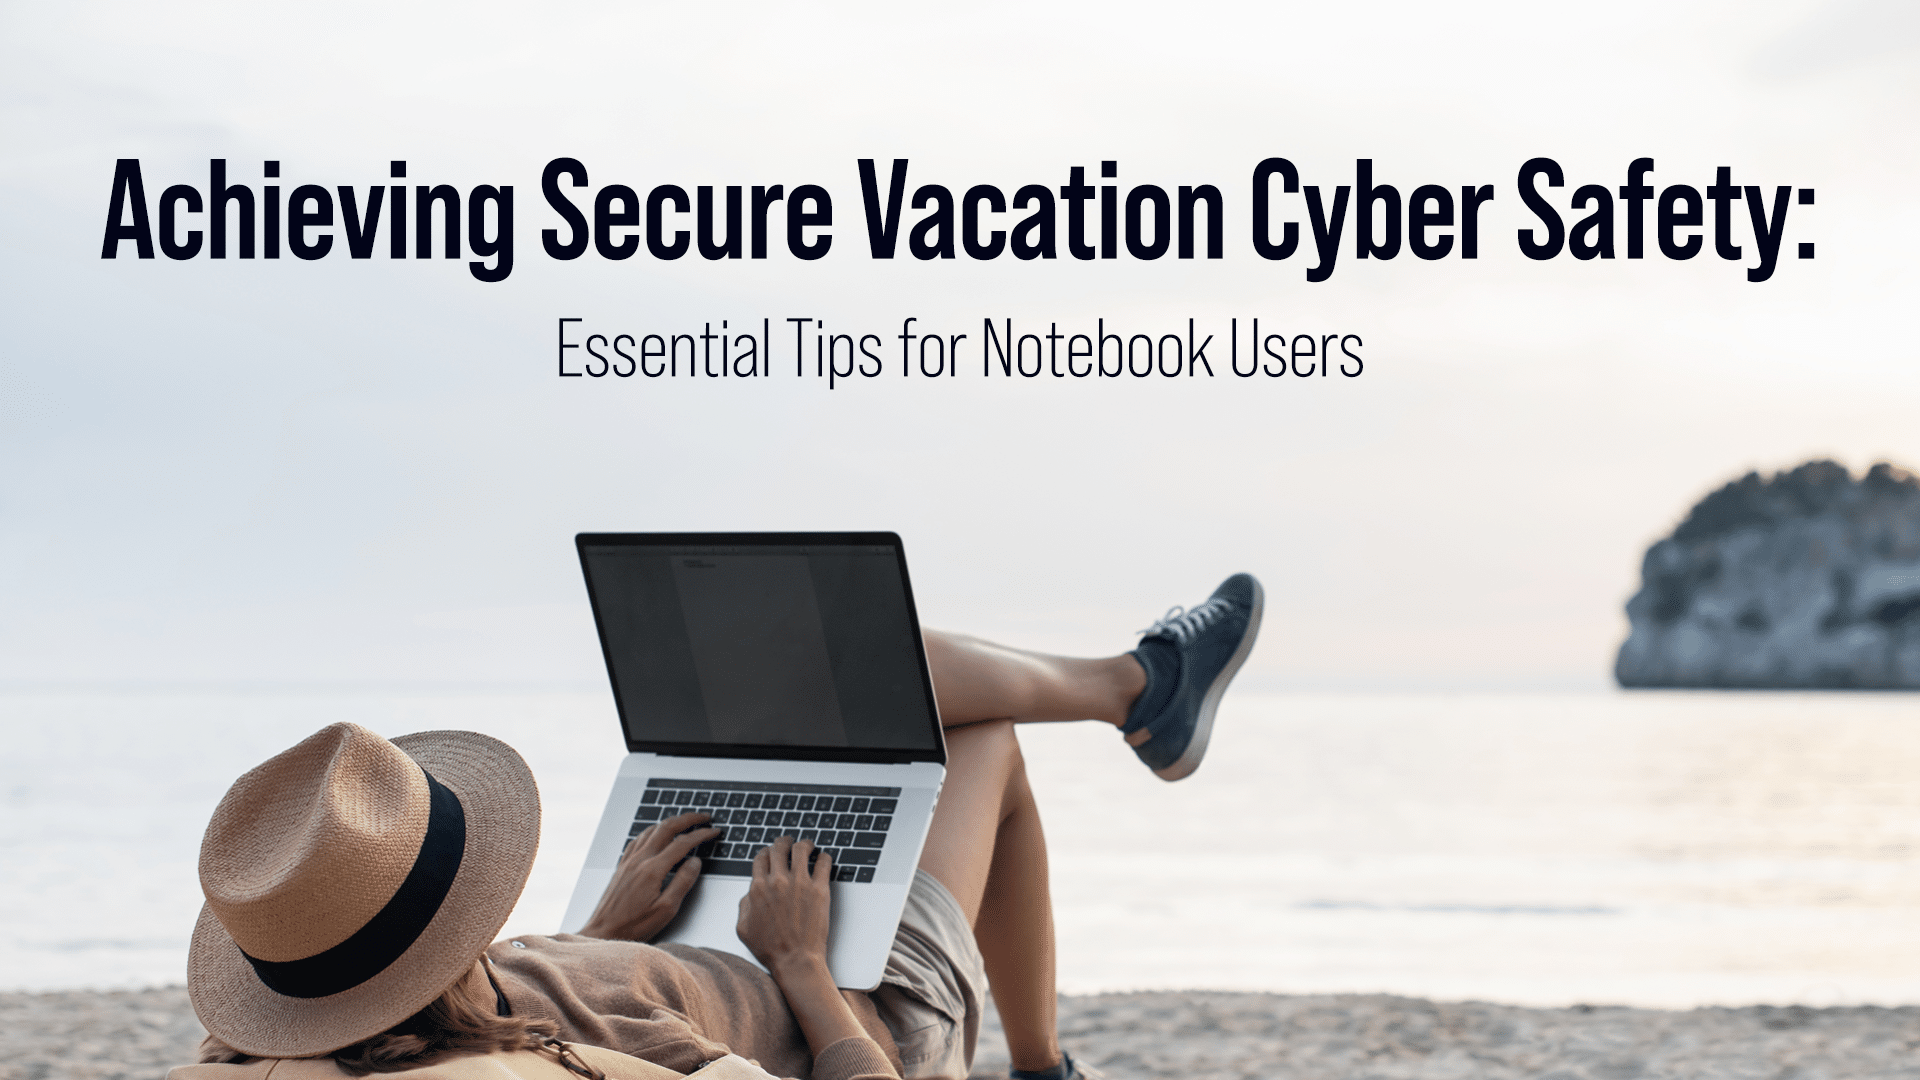 Achieving Secure Vacation Cyber Safety: Essential Tips for Notebook Users